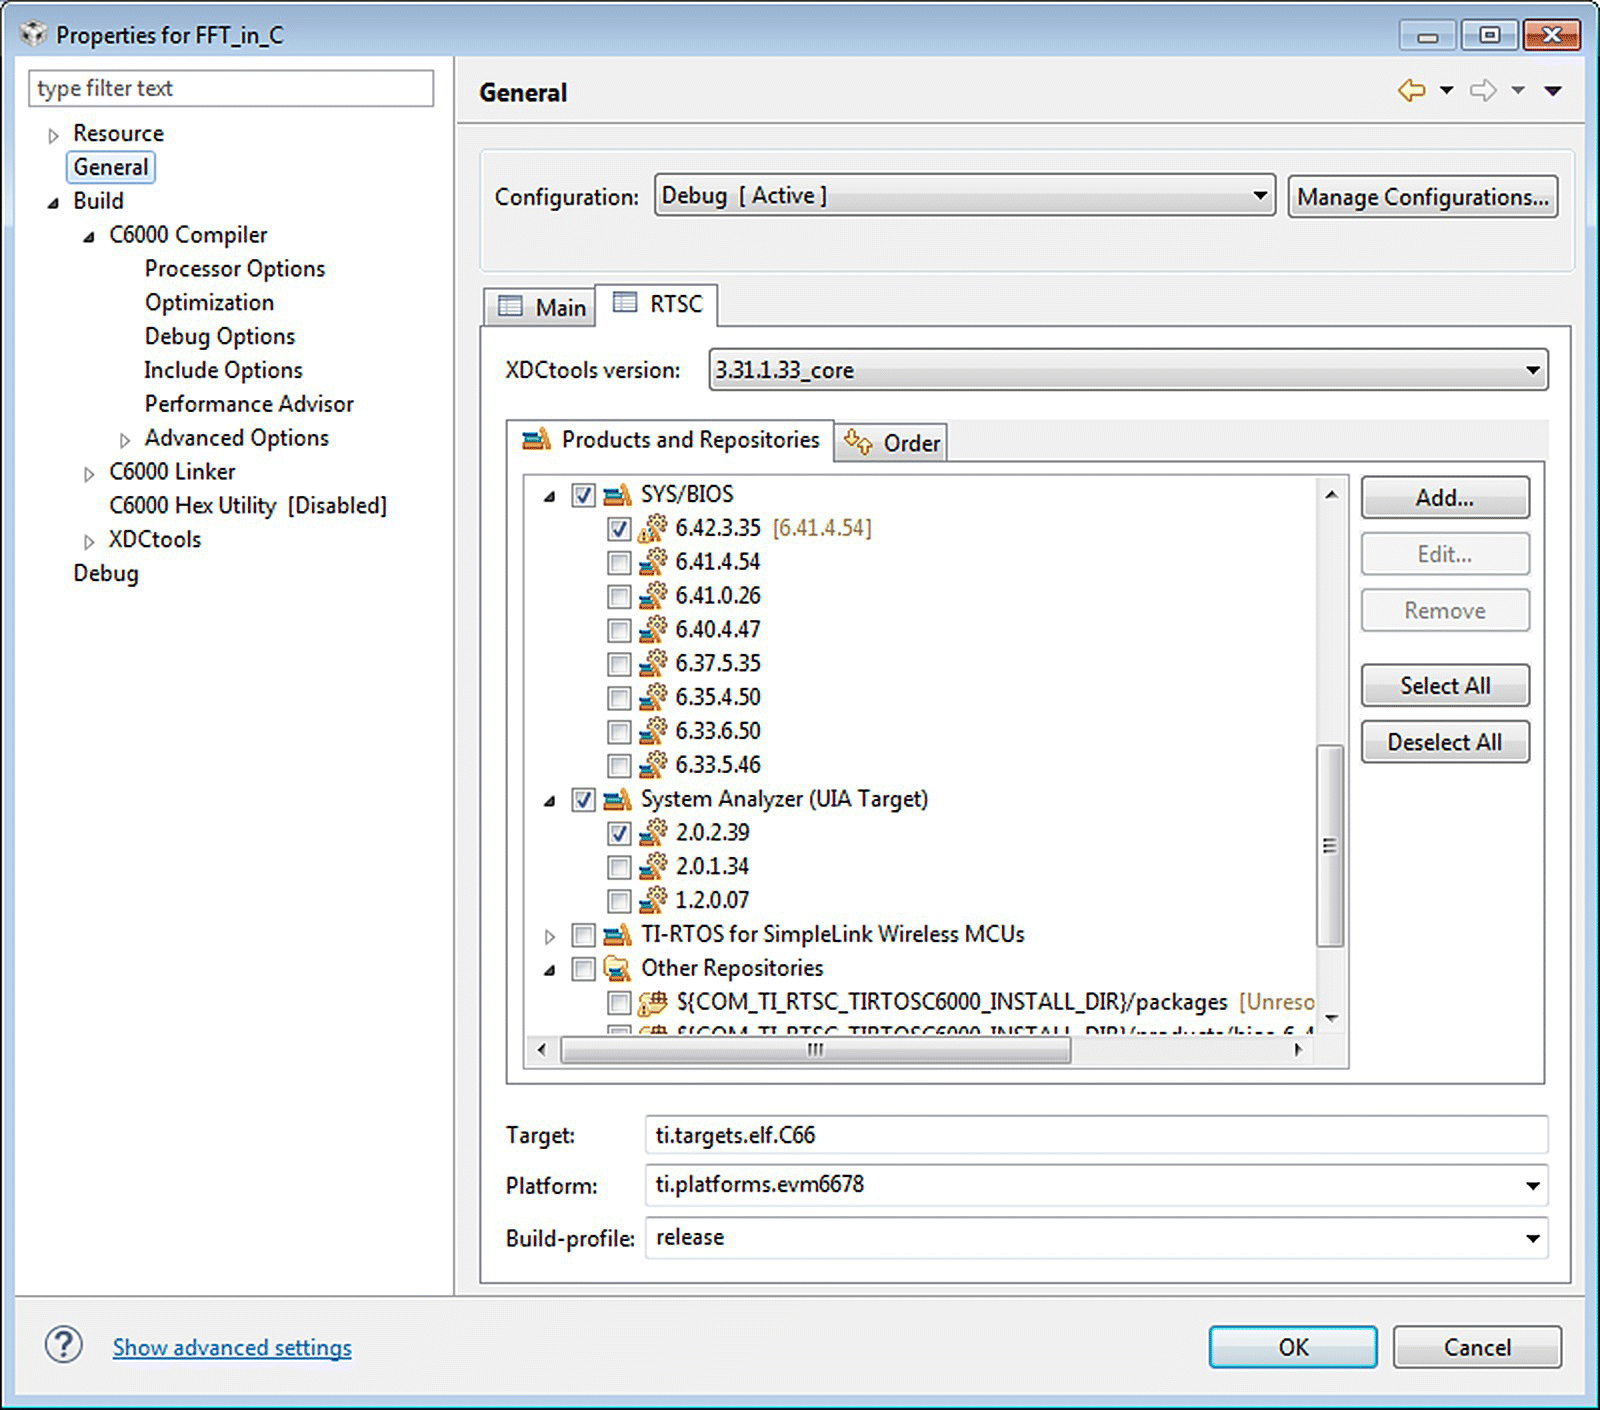 Window with a title bar “Properties for FFT_in_C” displaying the Real-Time Software Components (RTSC) derived from the general configuration toolbar.